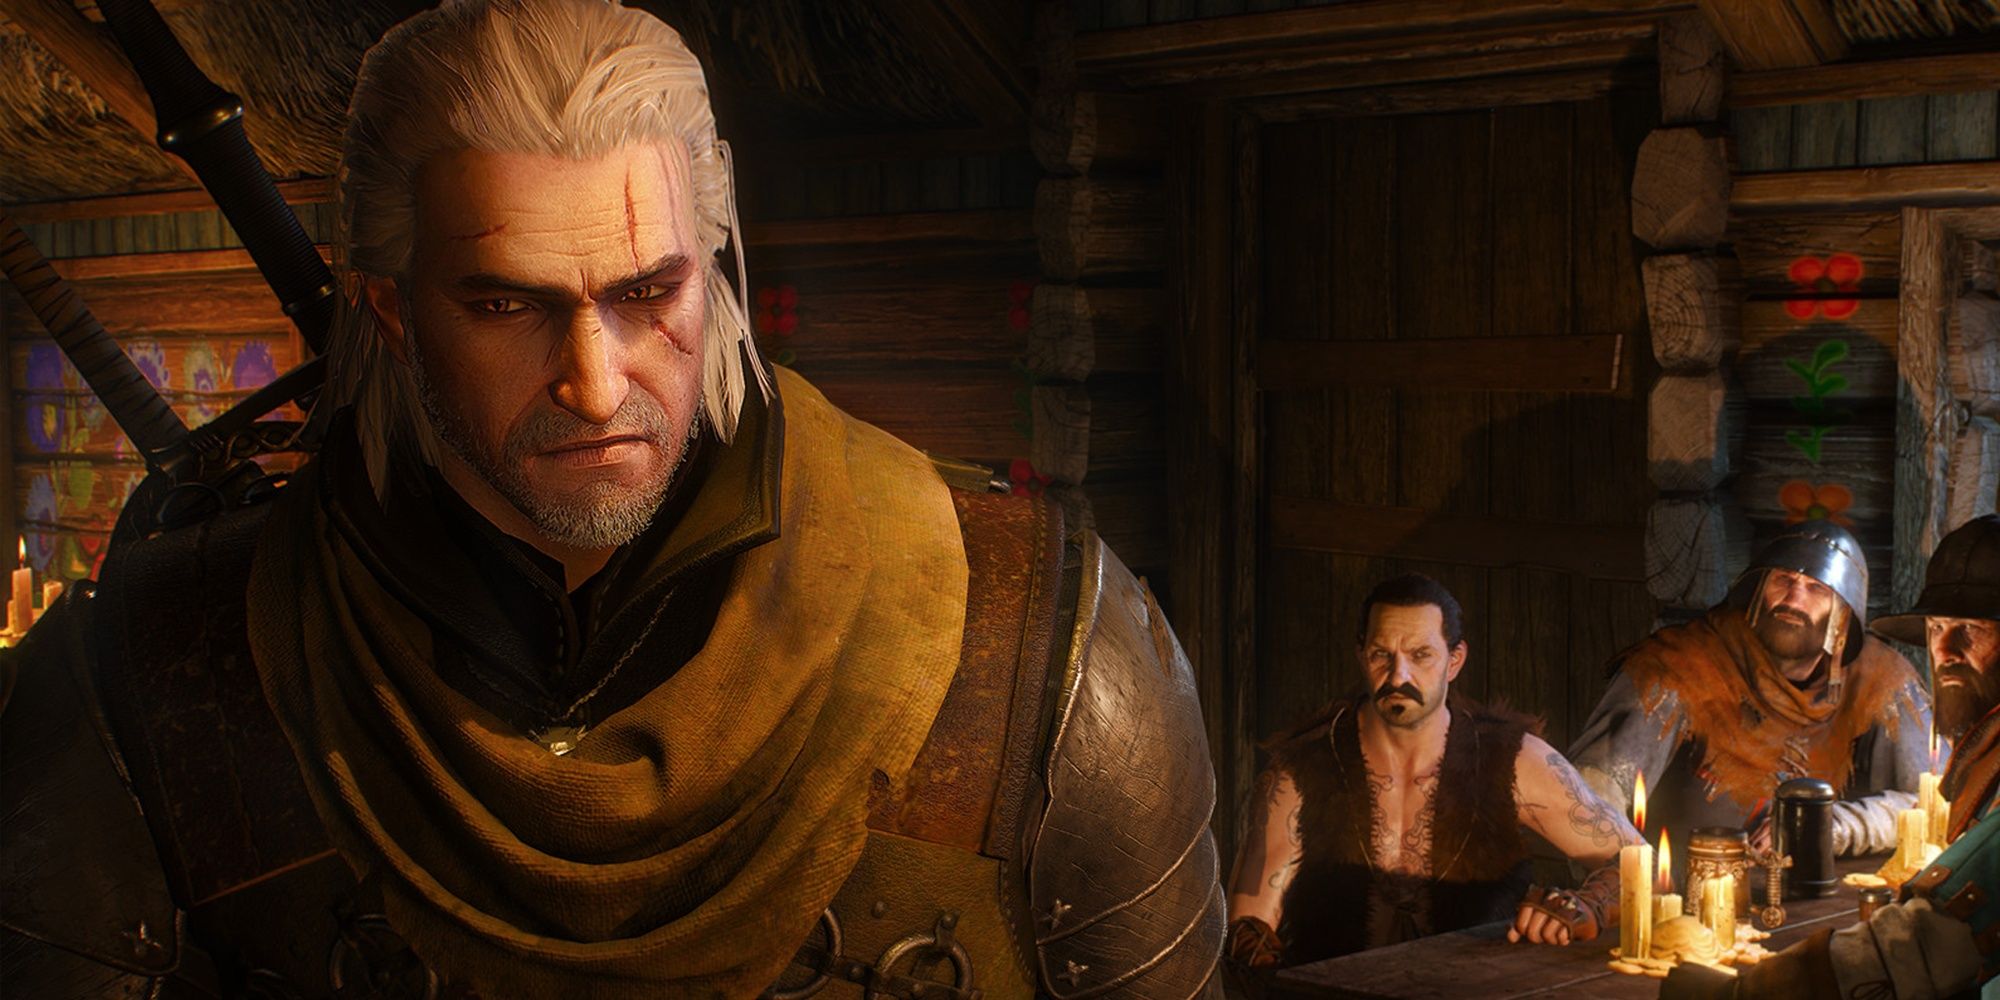 Witcher 3 Geralt in the bar with three other characters glaring at him in the background